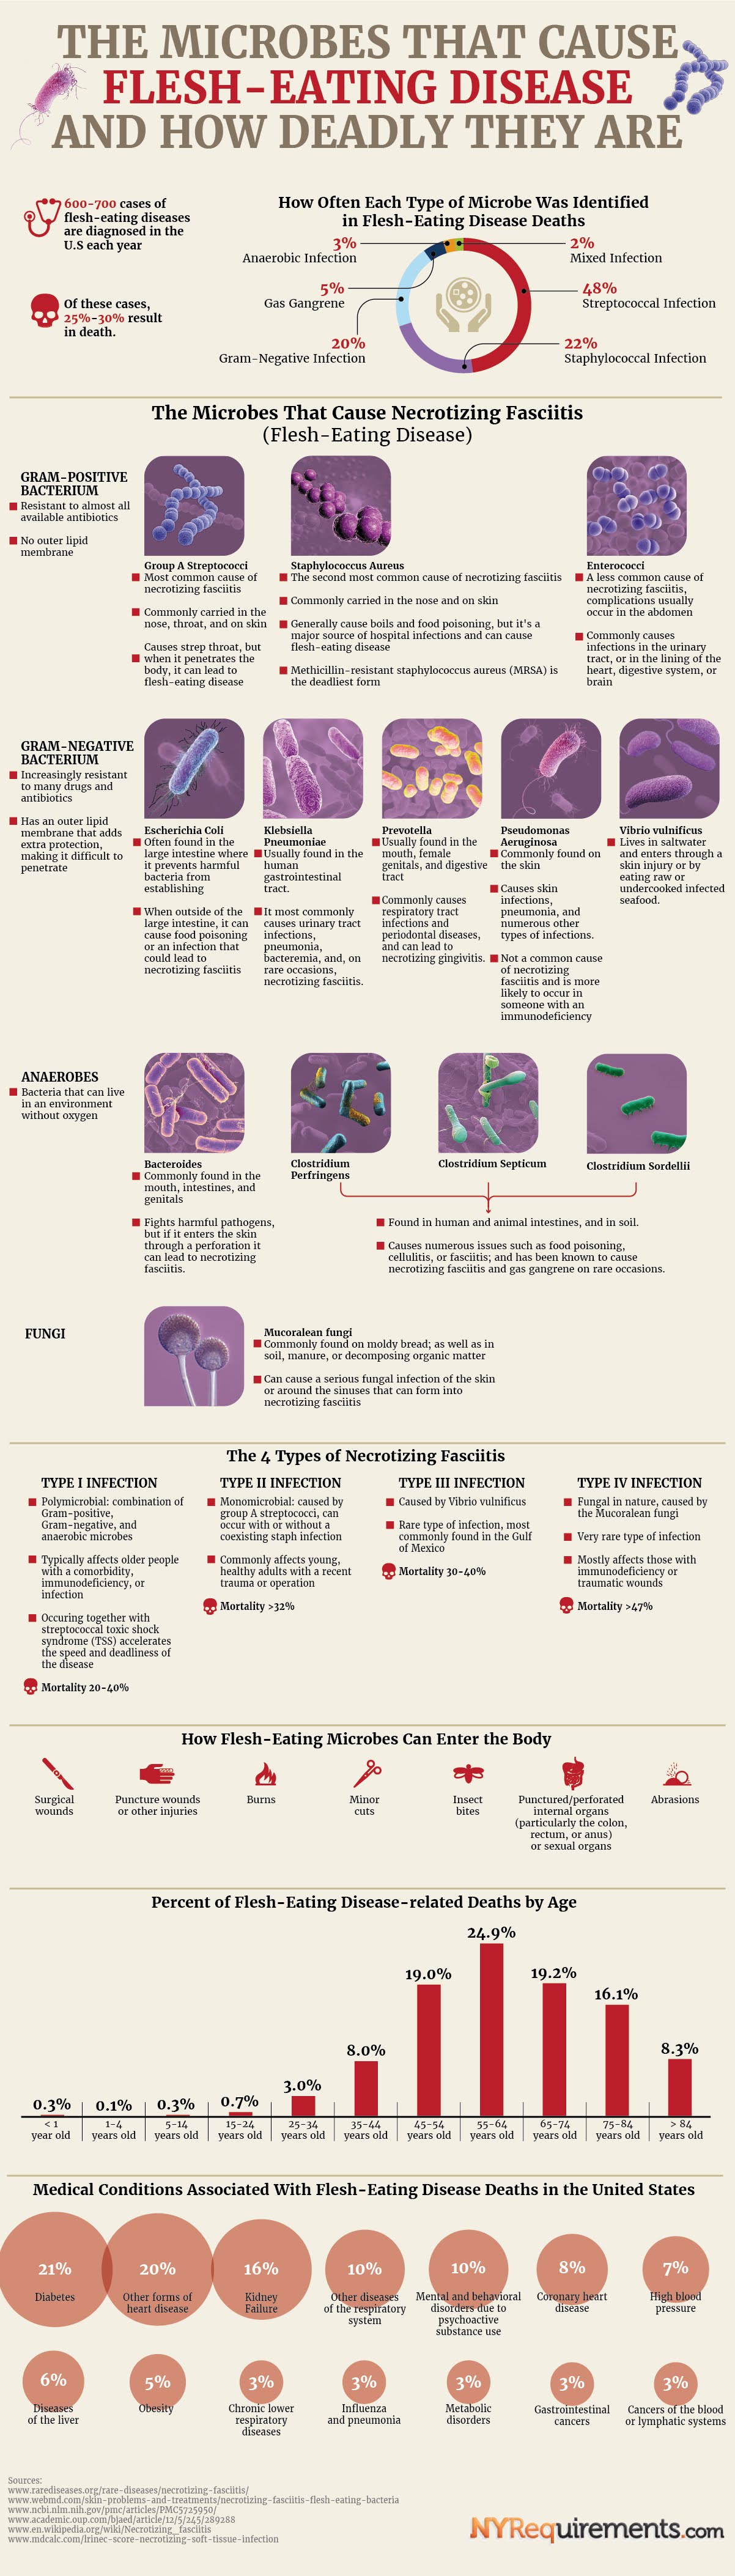 The Microbes That Cause Flesh-Eating Disease and How Deadly They Are #Infographic